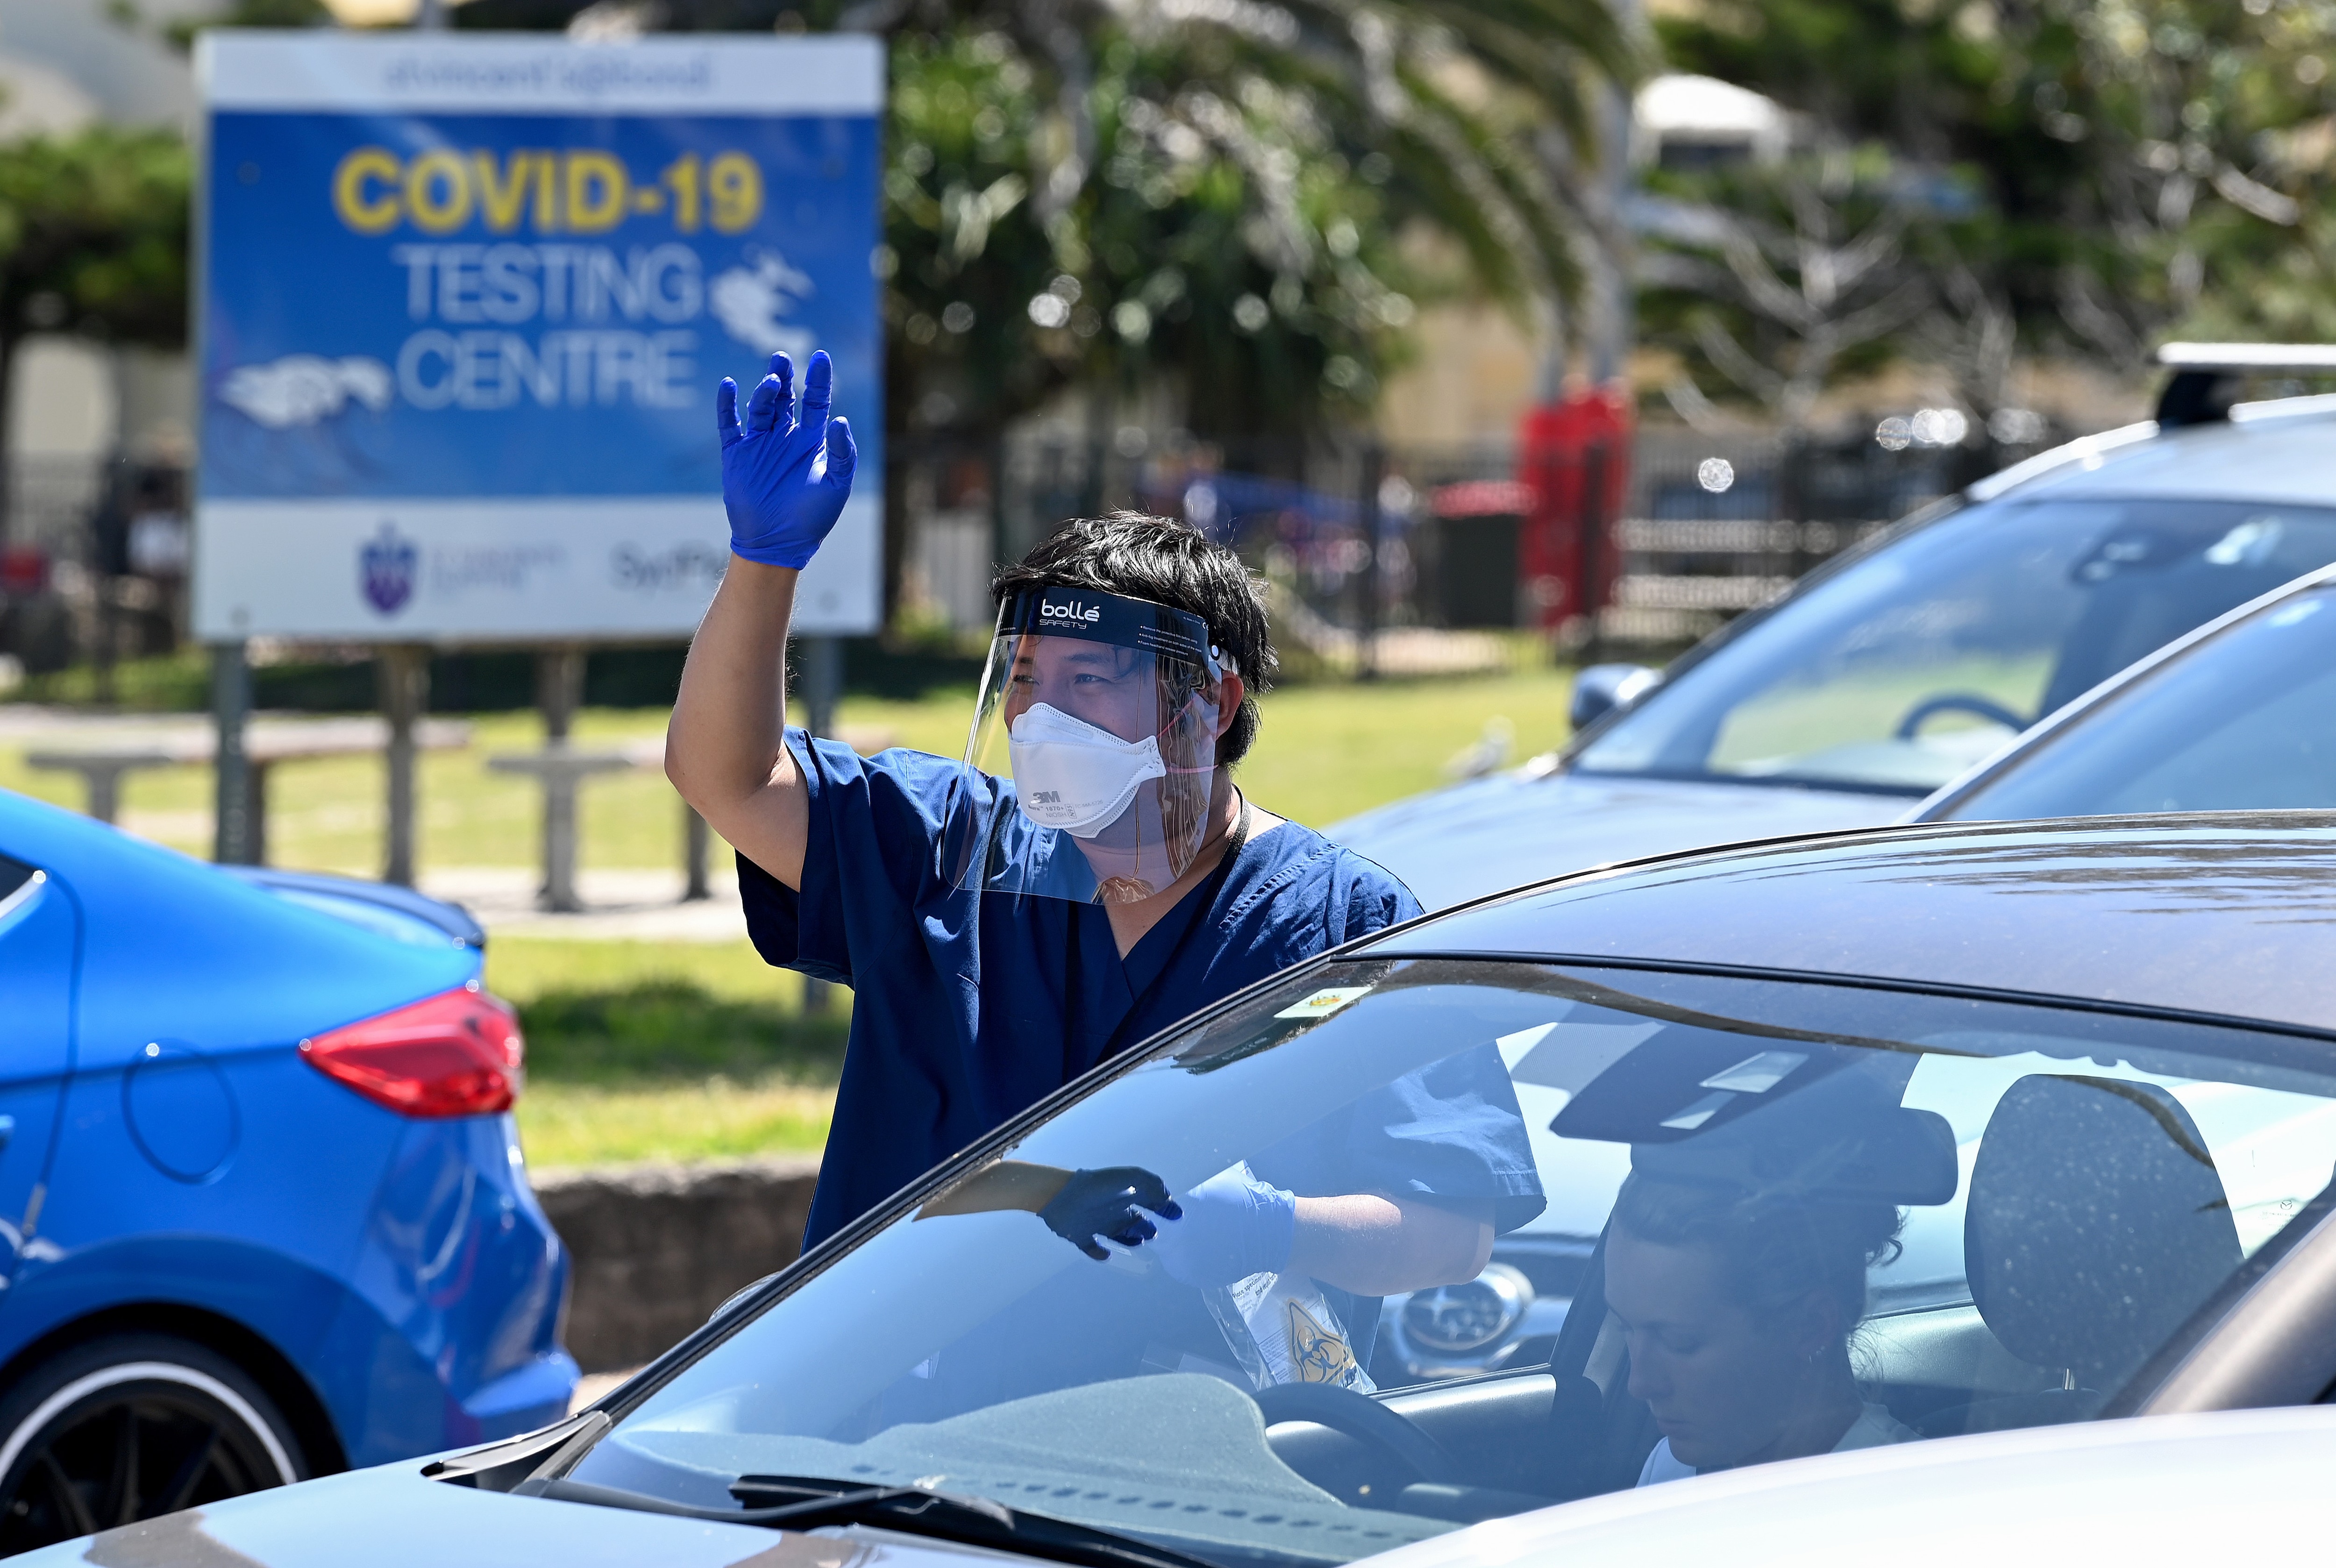 Healthcare workers administer COVID-19 tests at a drive-through testing clinic at Bondi Beach in Sydney.